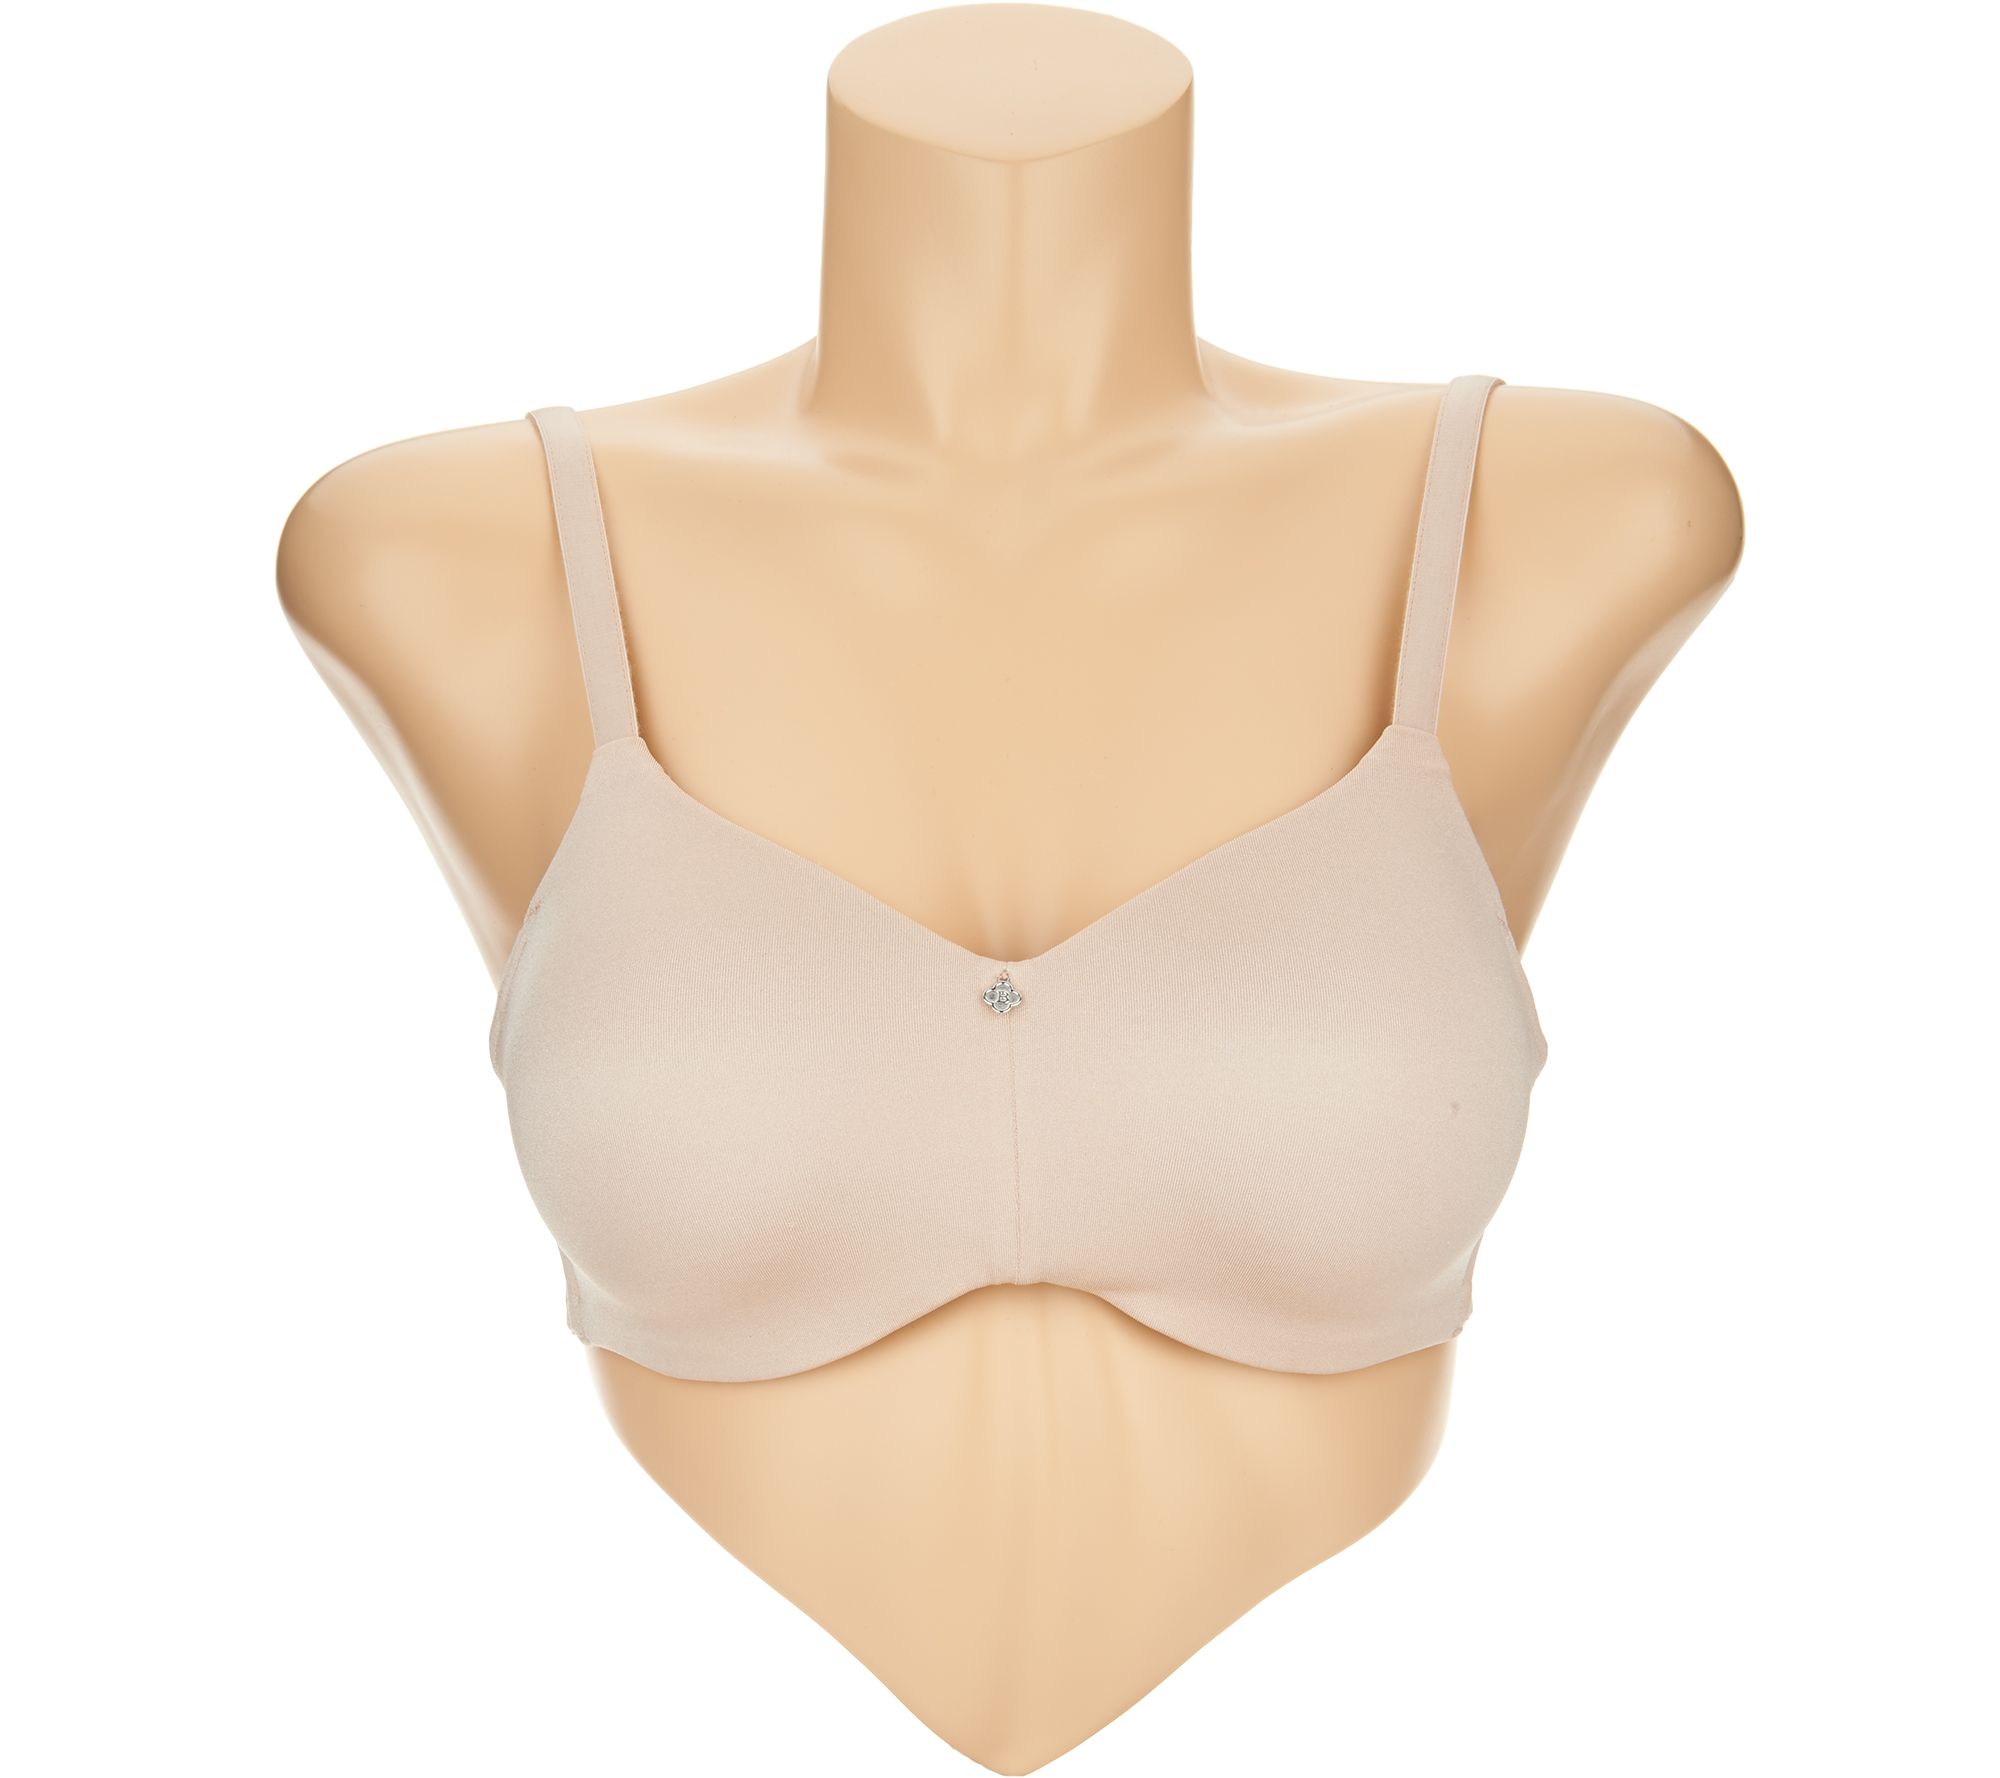 BraWorld - Ladies we have new arrivals! So many bras are